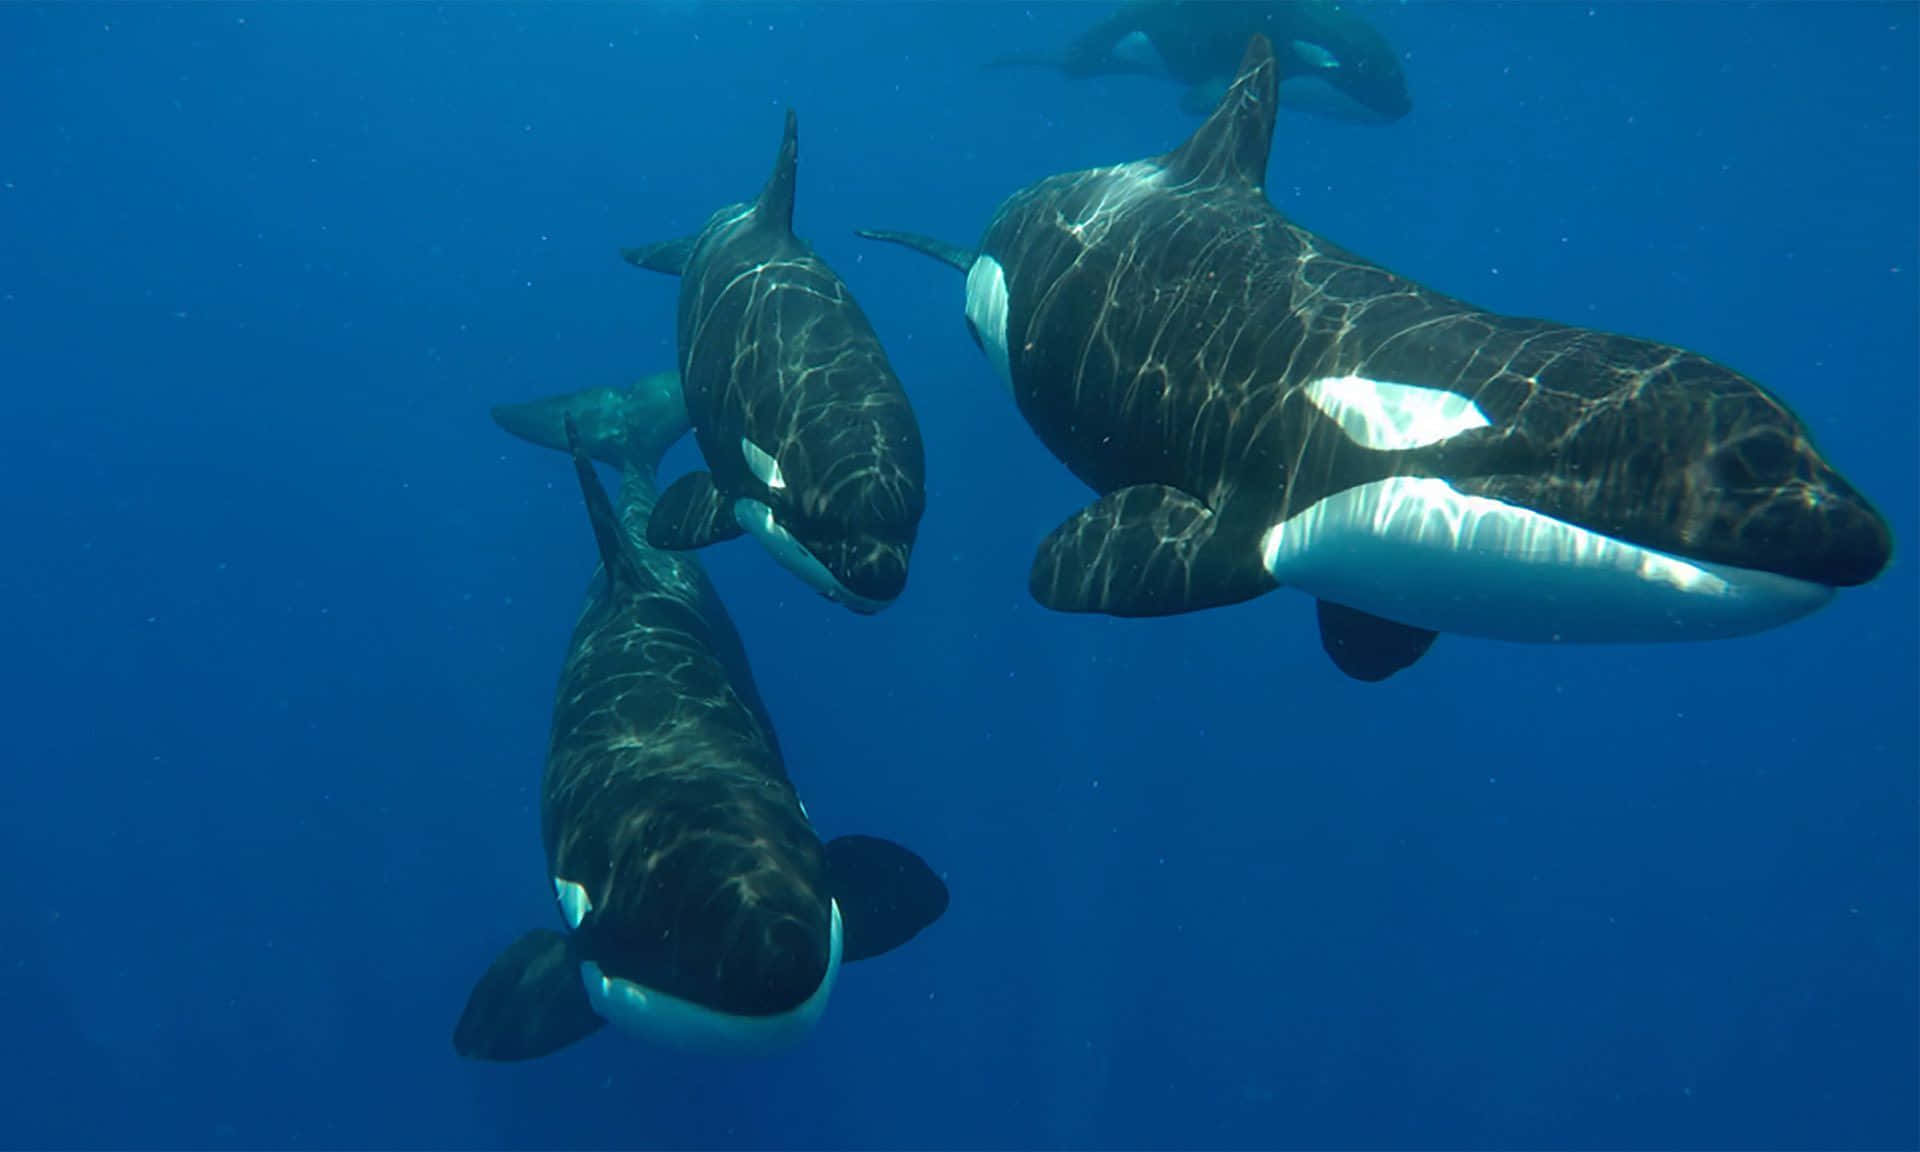 Orca Whales In The Pacific Ocean